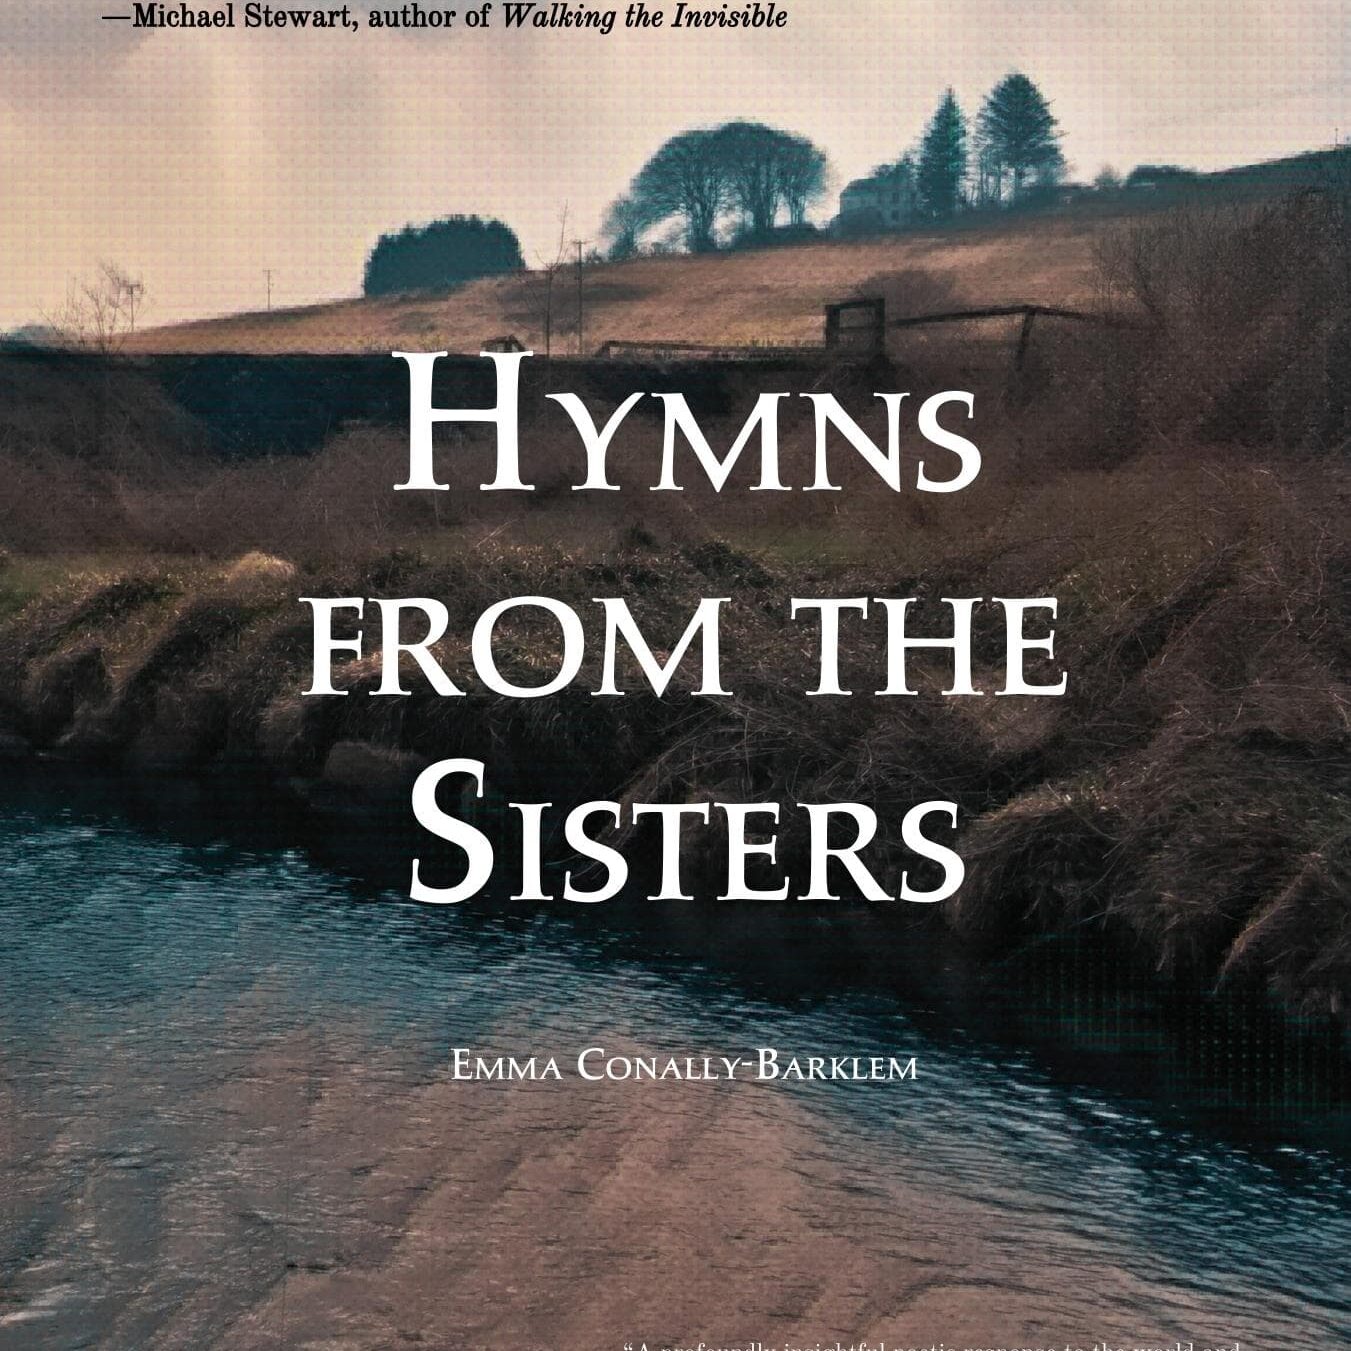 Hymns from the Sisters